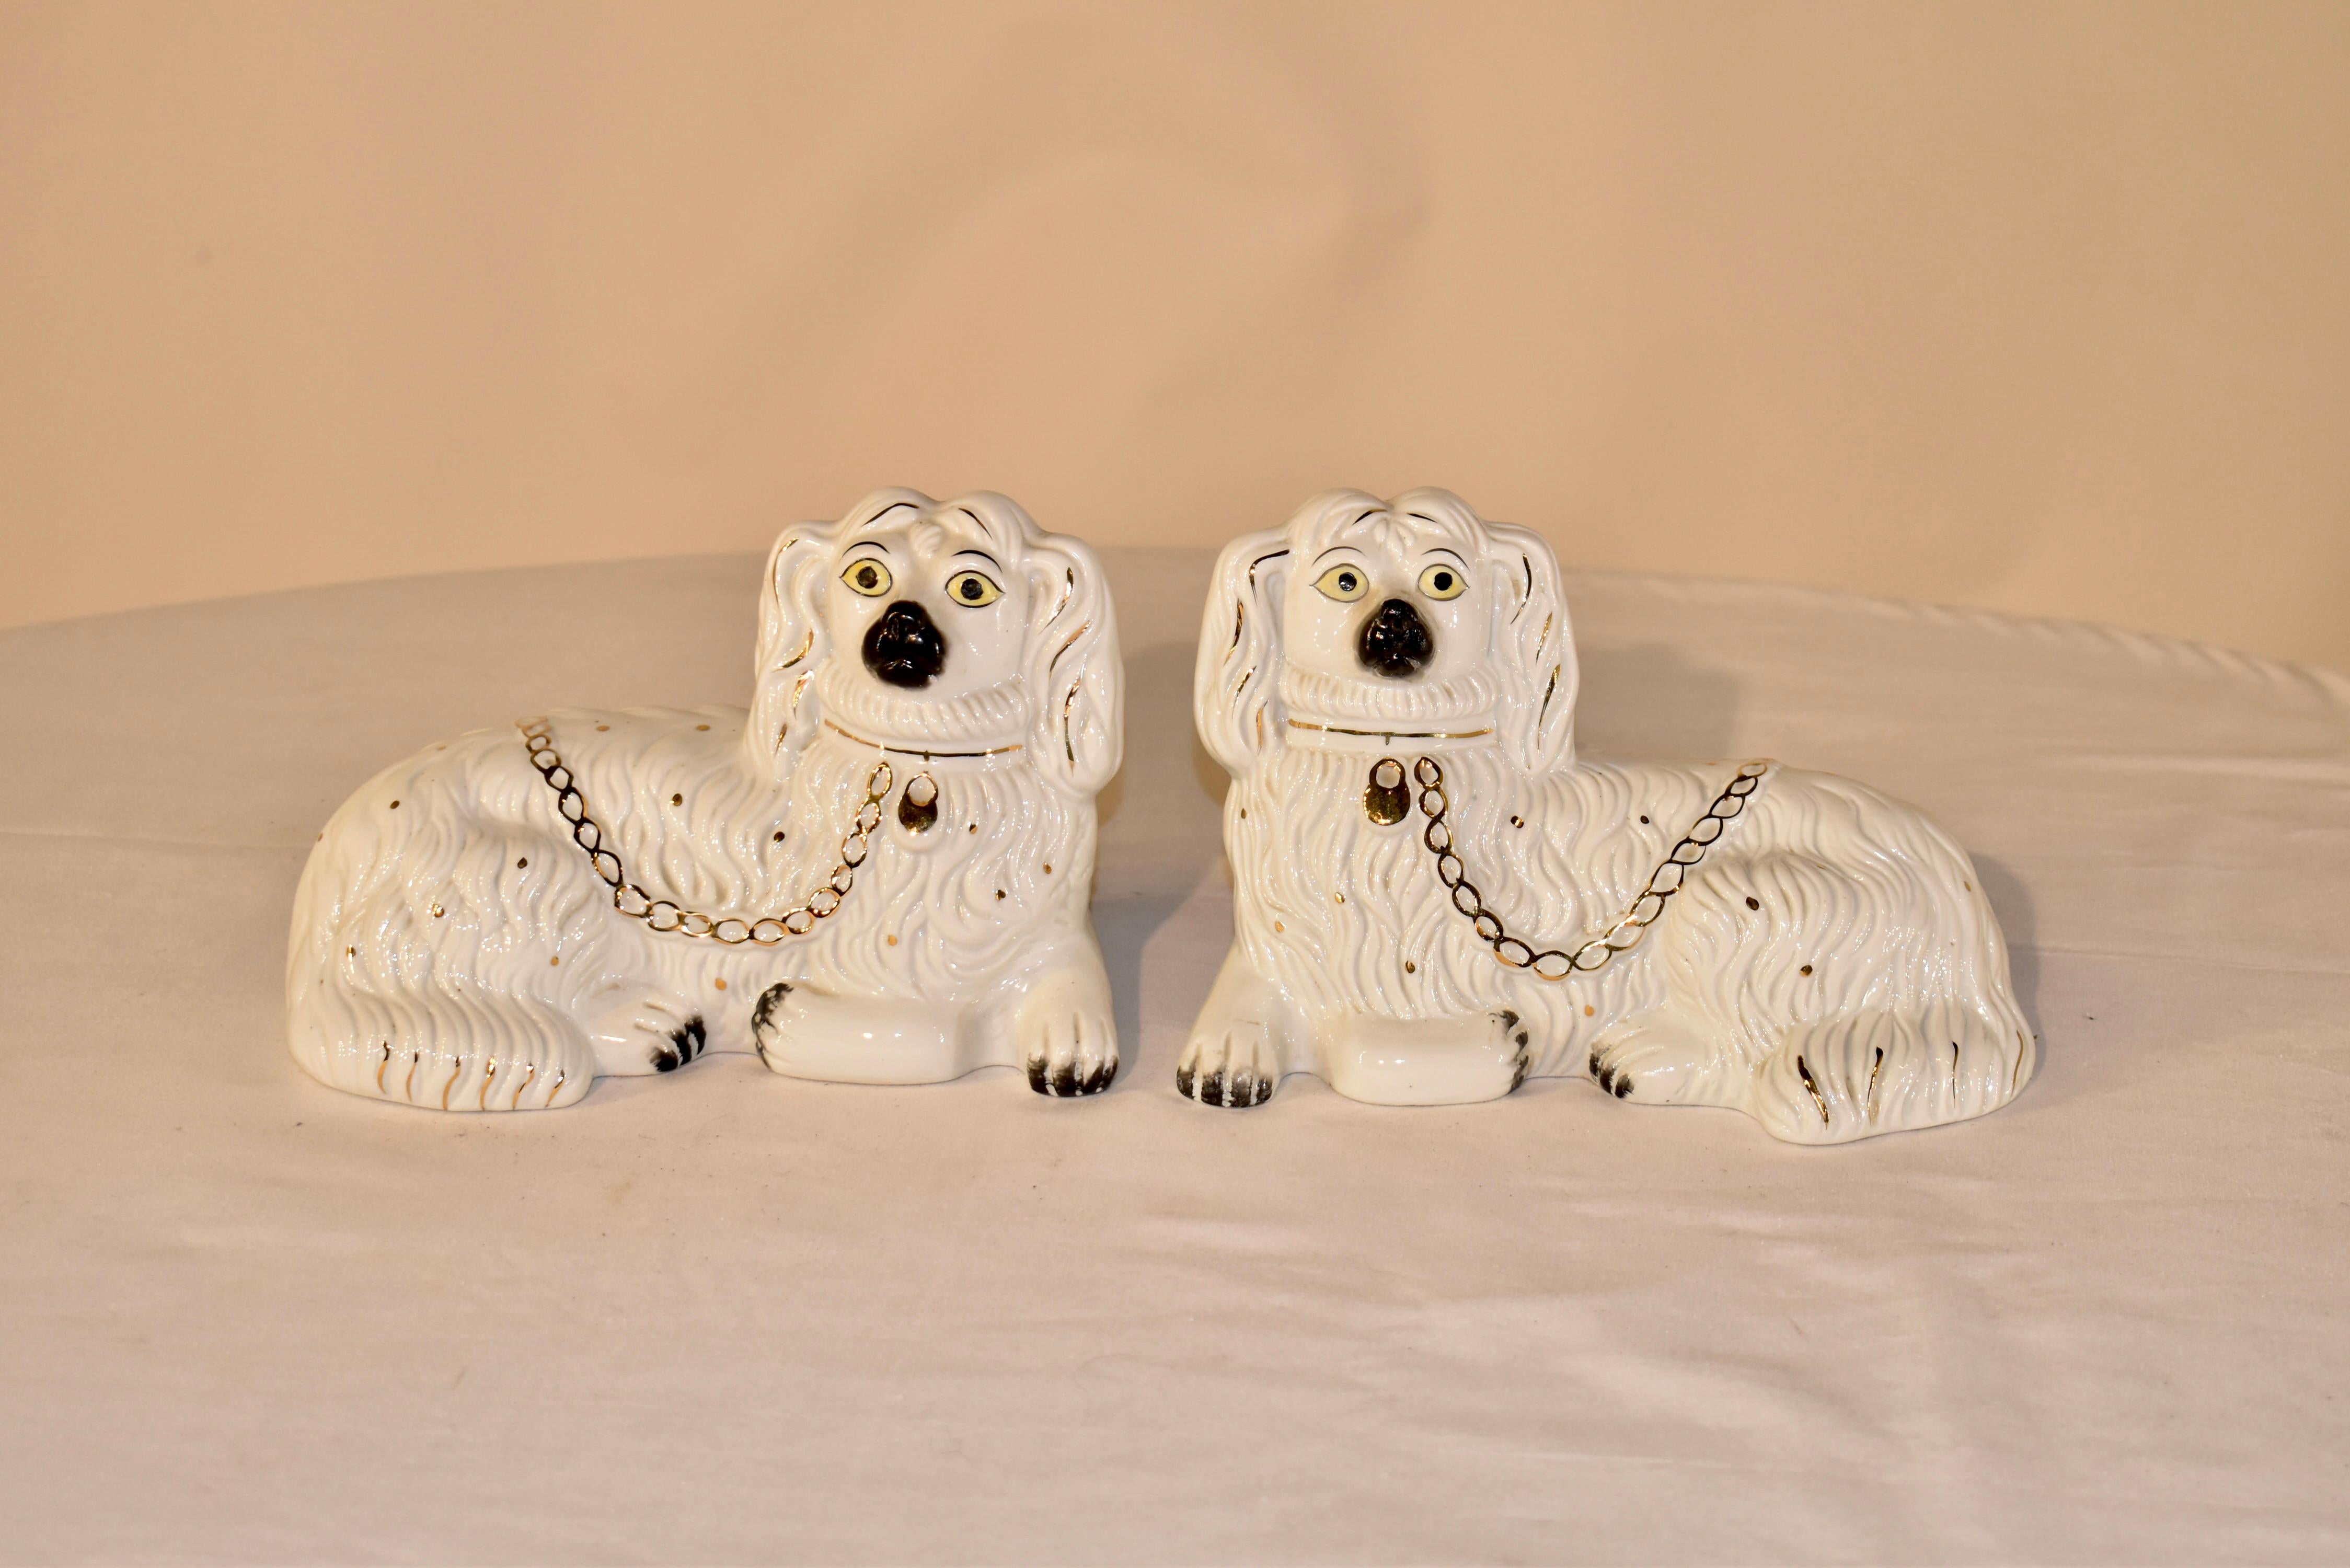 Pair of recumbent ceramic spaniels from the Staffordshire region of England. They have lovely faces which are hand painted and gold painted collars and chains. Nice mold detailing and gold embellishments throughout.